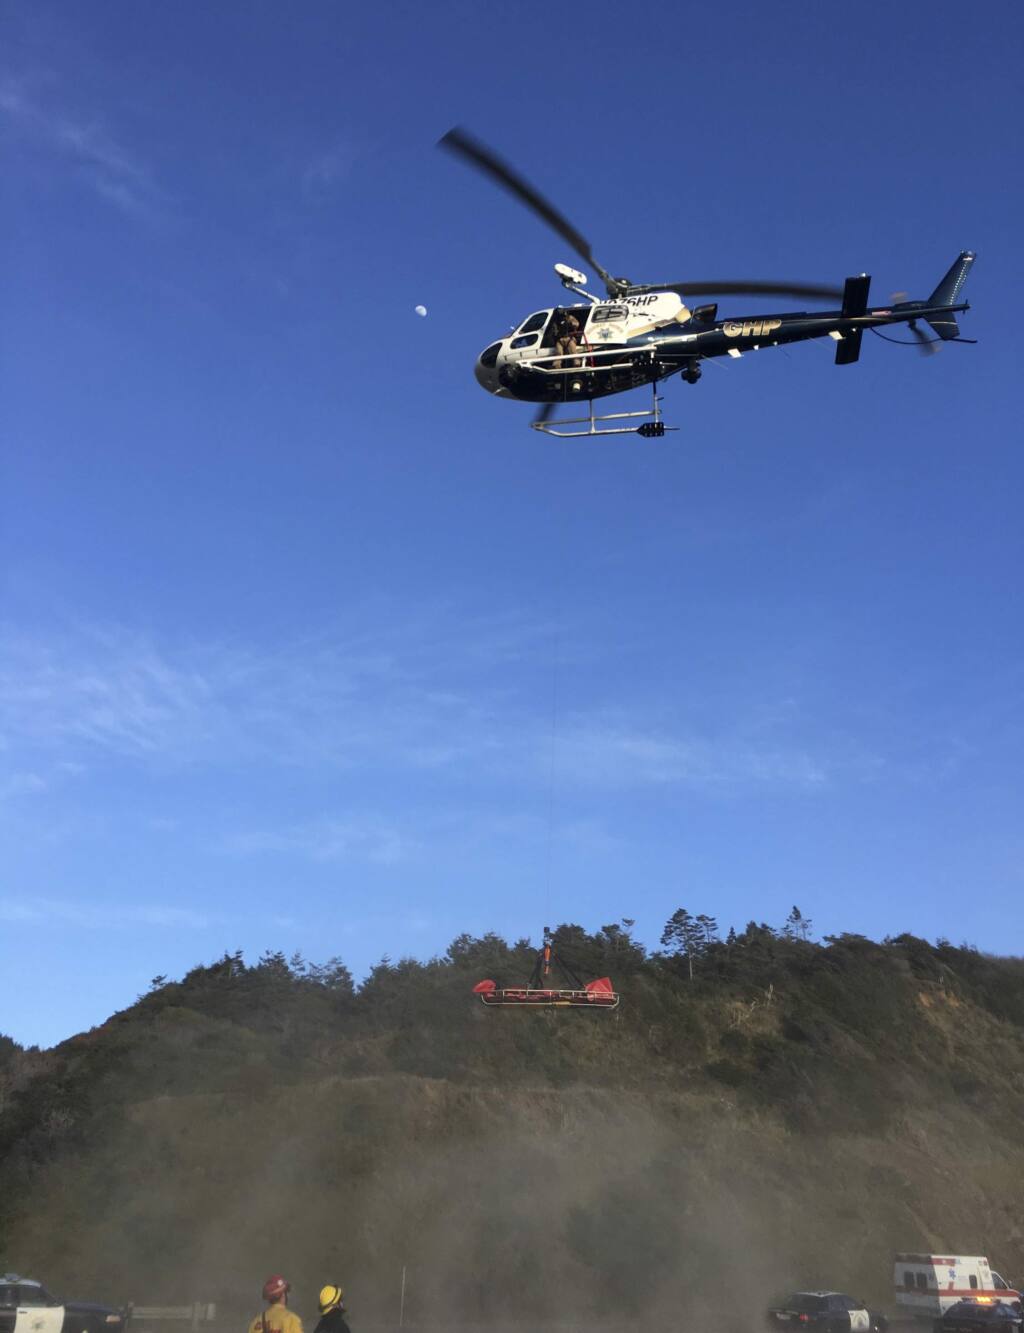 This Tuesday, March 27, 2018, photo provided by the California Highway Patrol shows a helicopter hovering over the scene where a vehicle plunged off a cliff in Northern California near Mendocino, Calif. The California Highway Patrol identified the adult victims Wednesday as Jennifer Hart and Sarah Hart, who died along with a few other children. (California Highway Patrol via AP)